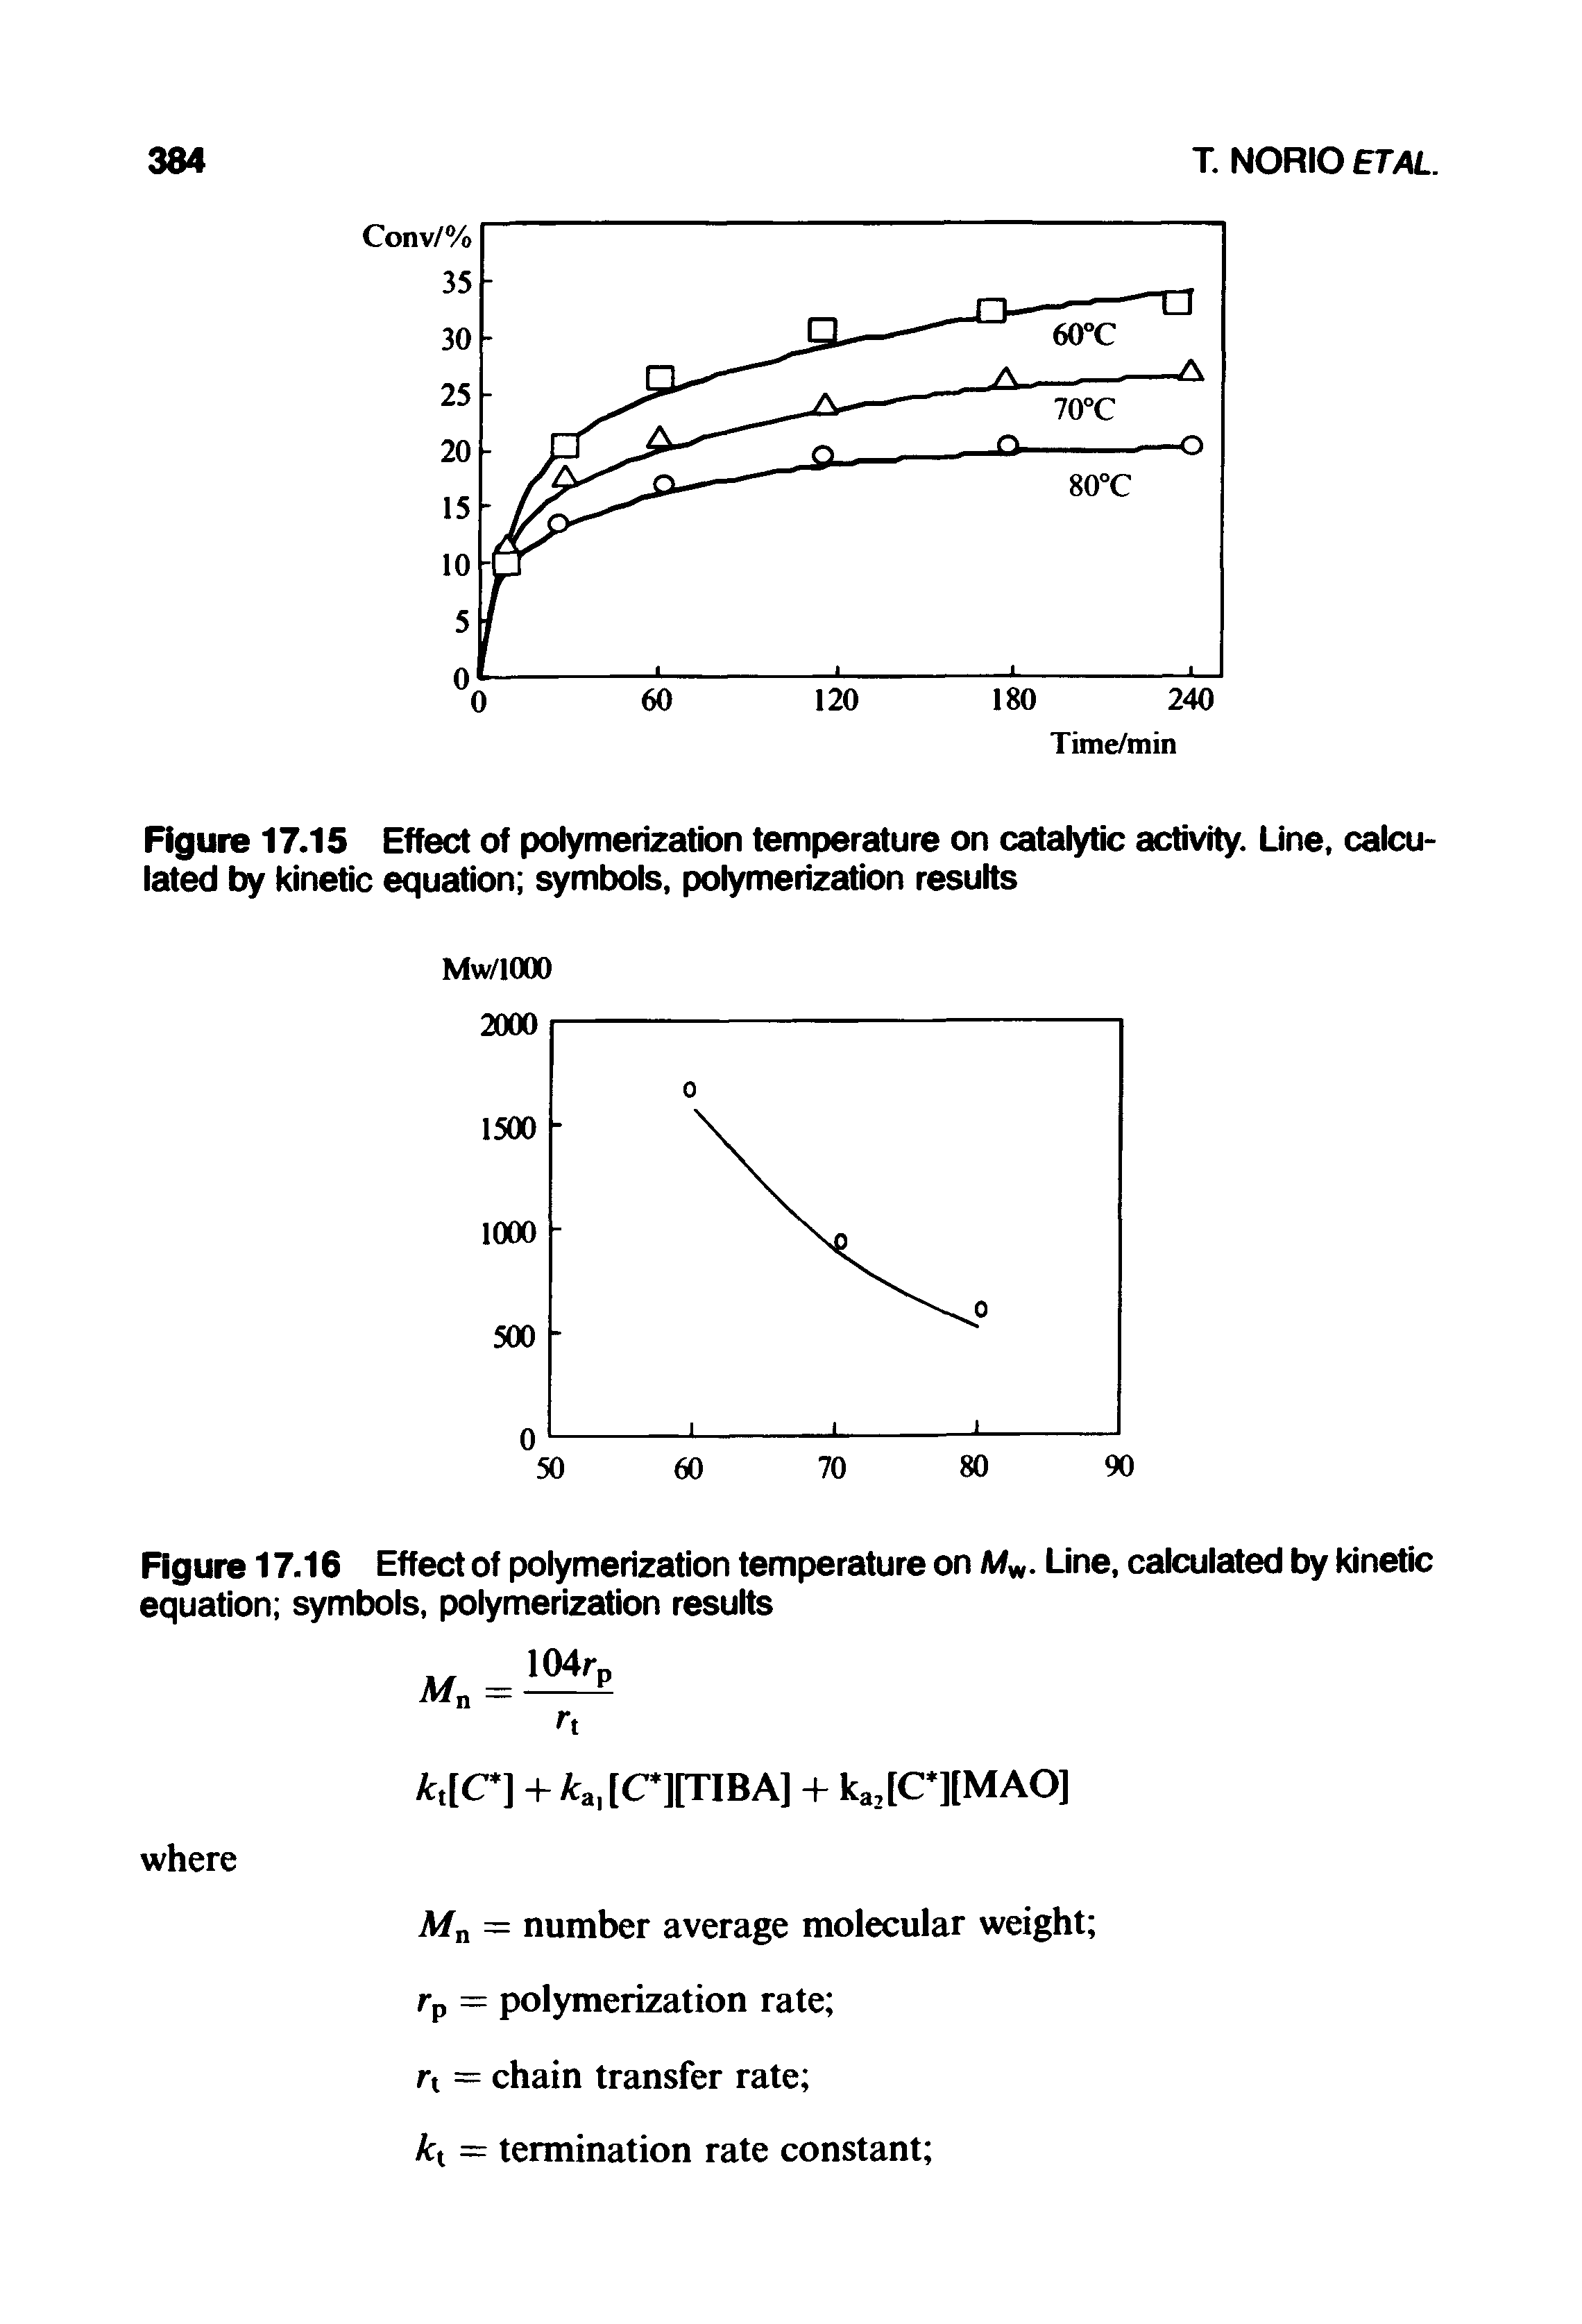 Figure 17.15 Effect of polymerization temperature on catalytic activity. Line, calculated by kinetic equation symbols, polymerization results...